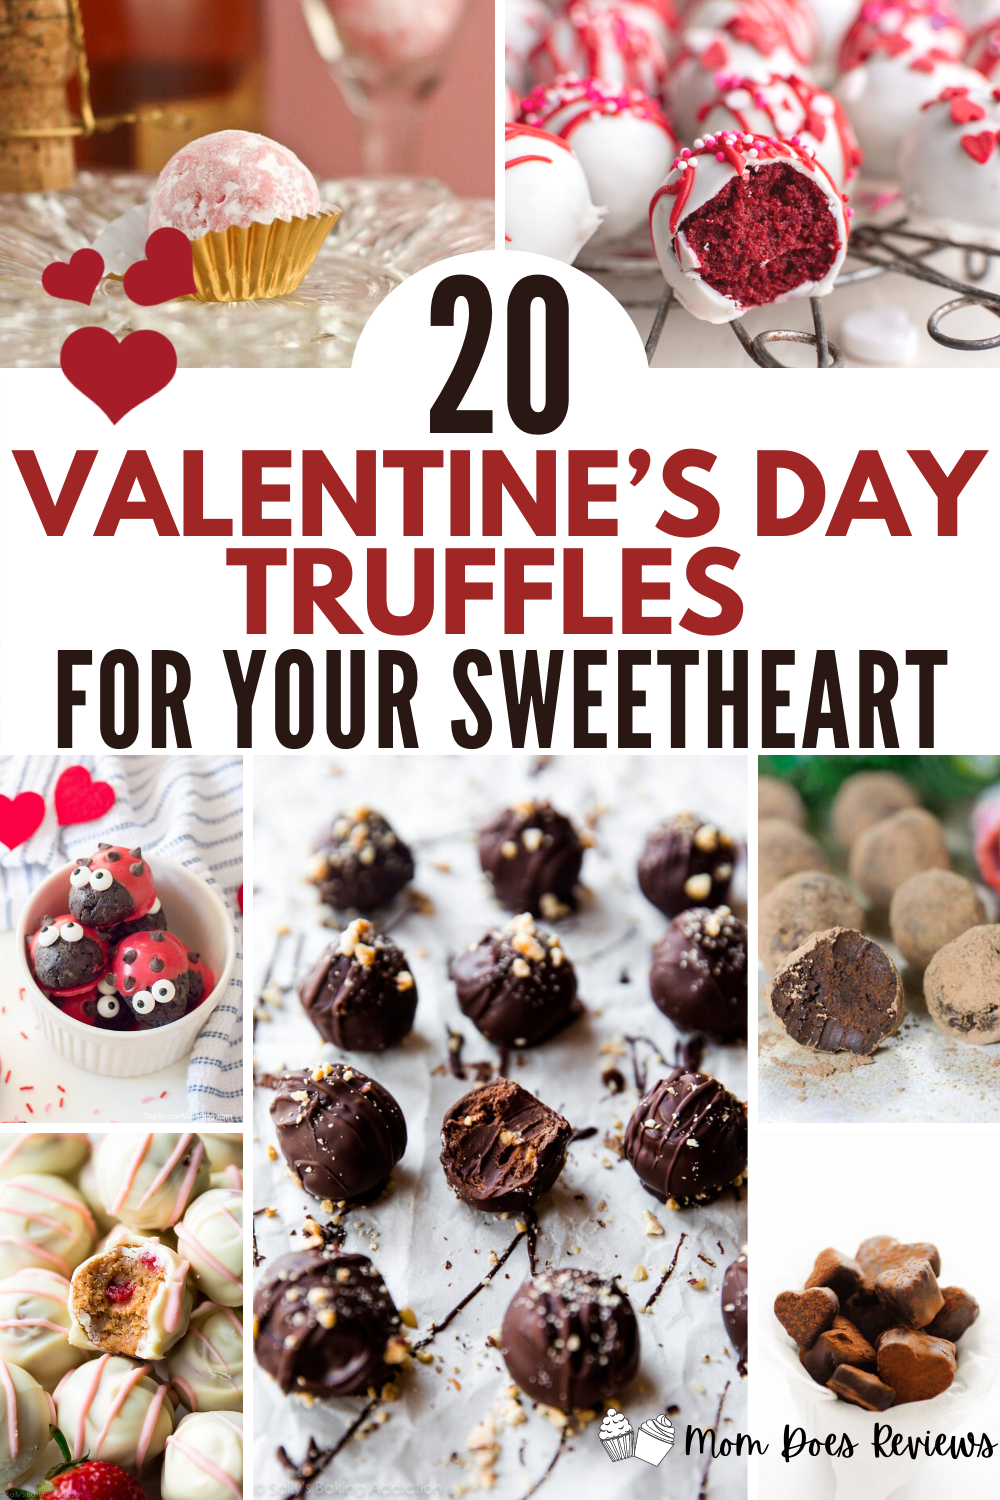 Valentine's Day Truffles for your Sweetheart!